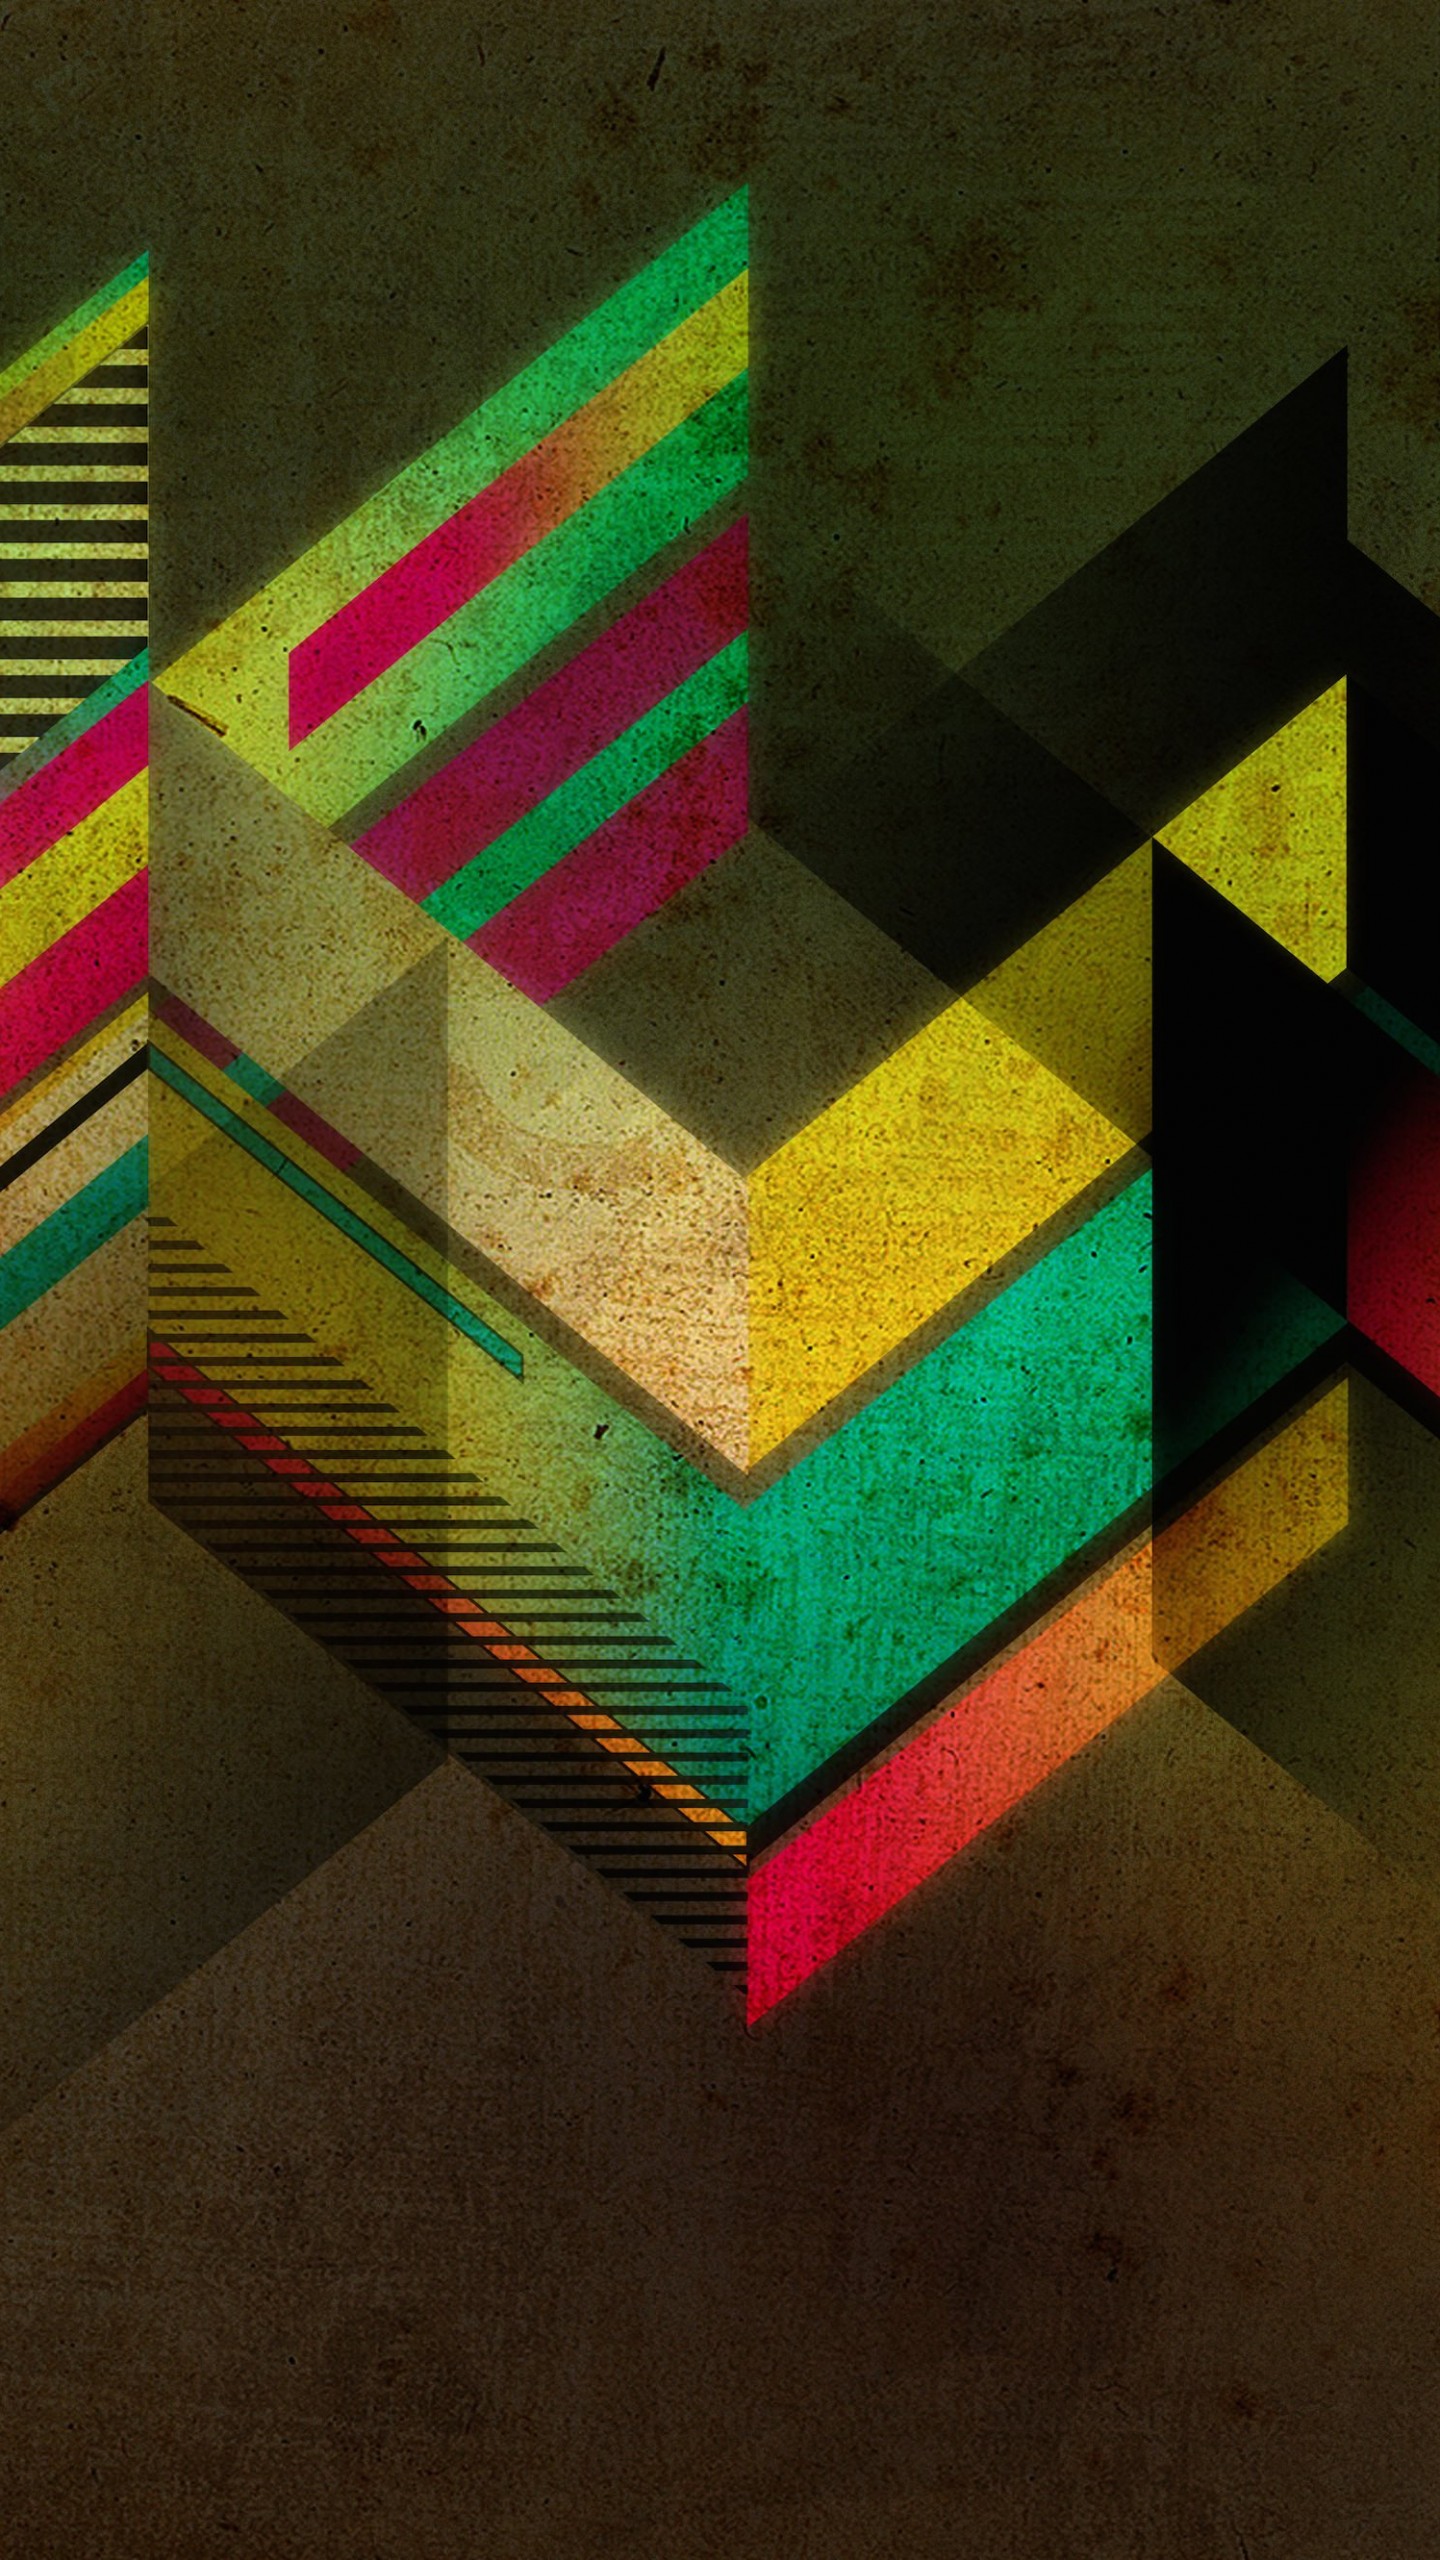 Retro Shapes Wallpaper for SAMSUNG Galaxy Note 4